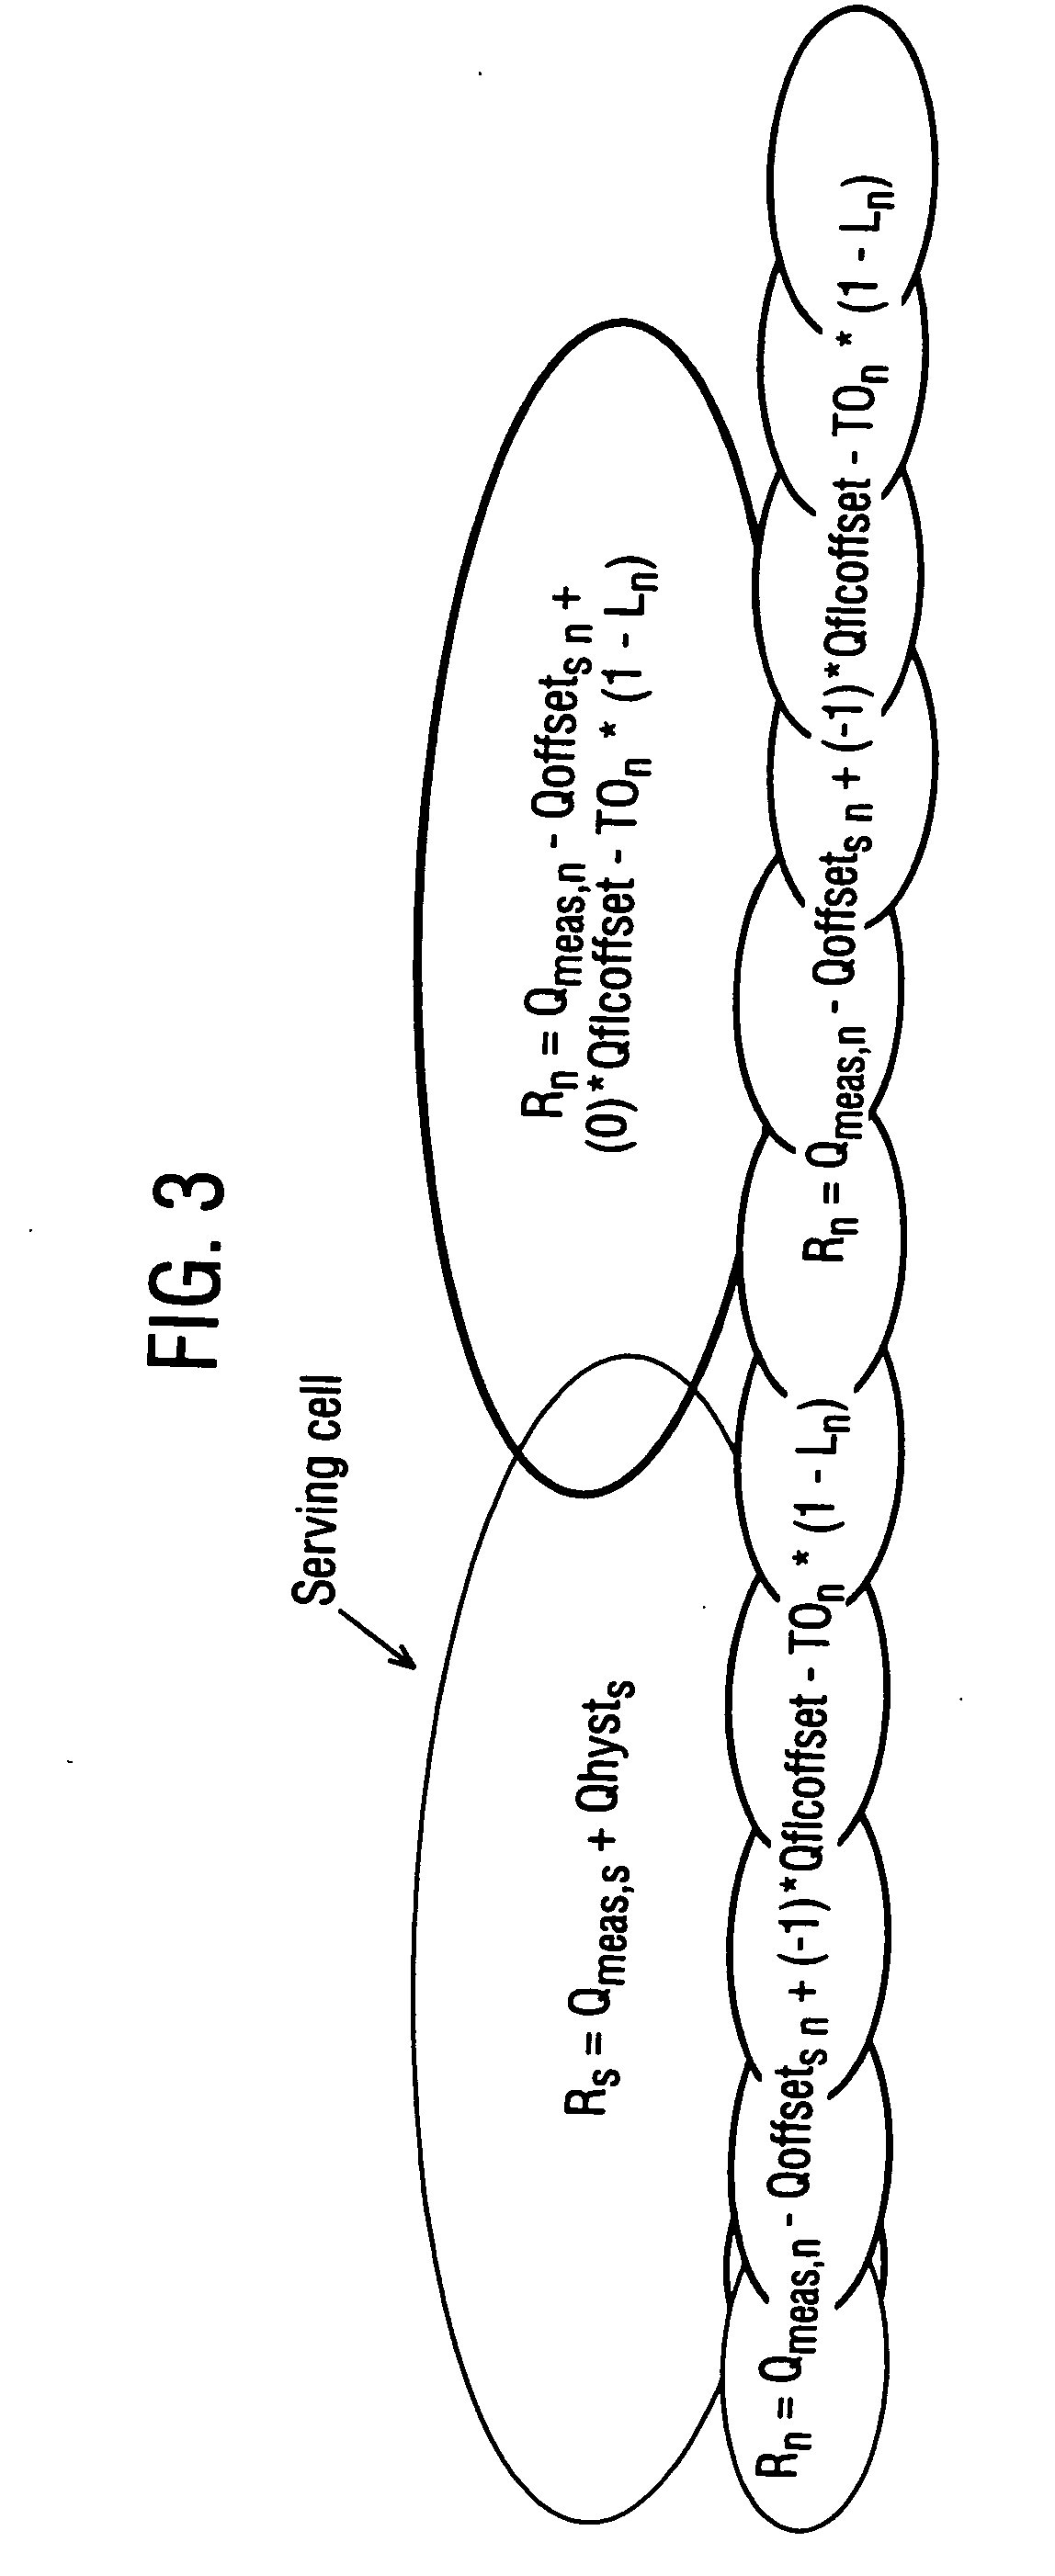 Frequency layer convergence method for MBMS